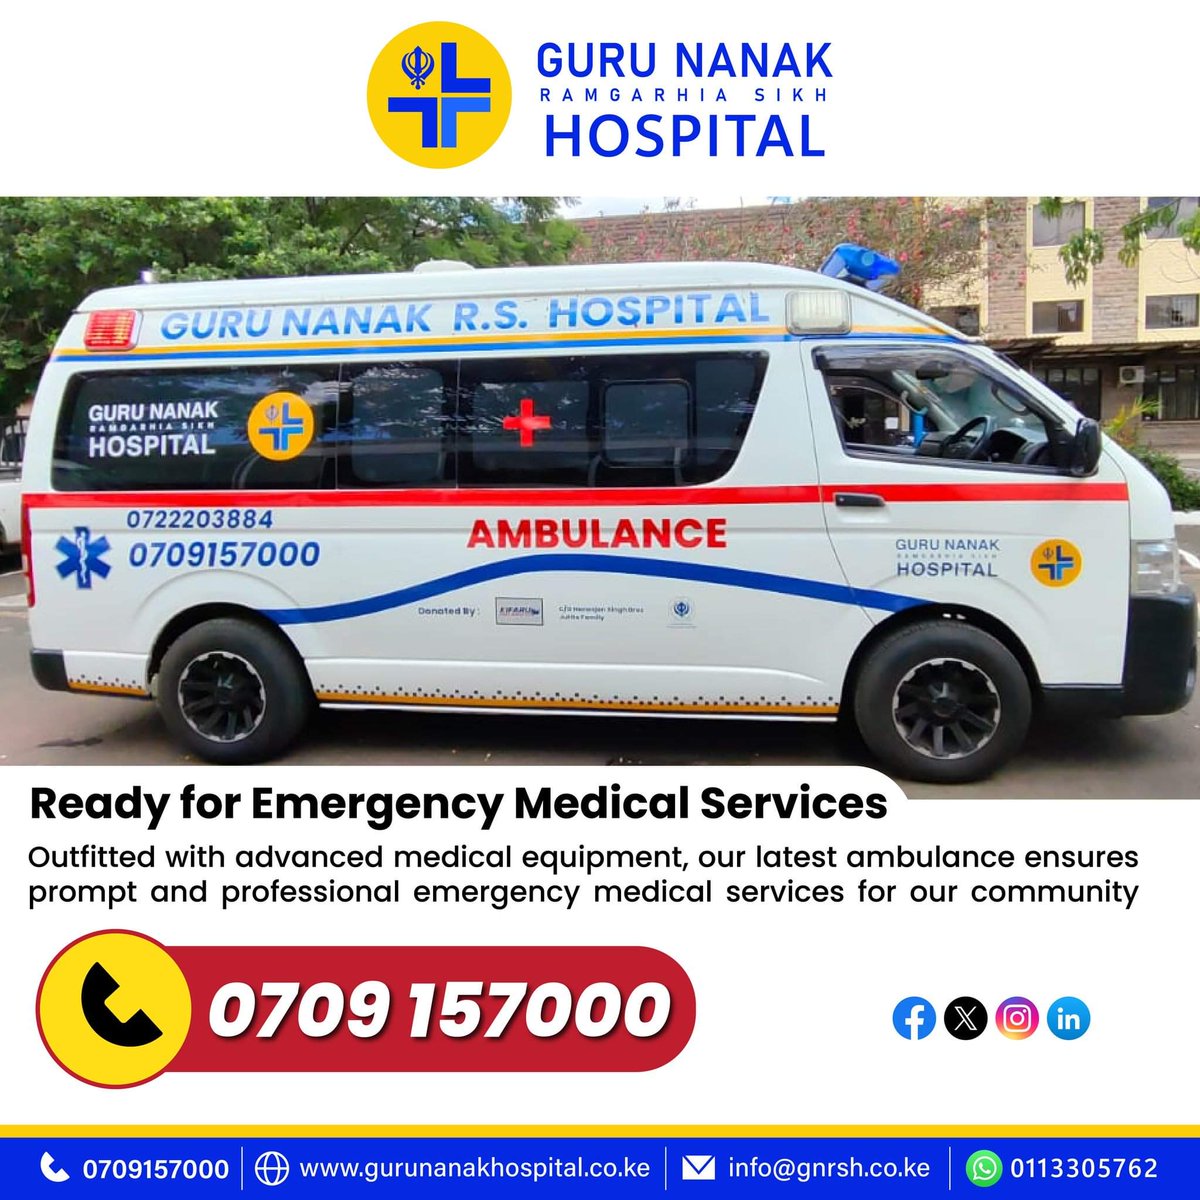 Quick response saves lives! Our #ambulanceservice are available 24/7 to ensure #swift  and #efficient  medical assistance. Trust us to be there when you need us most. #emergencyservices 
#emergencyresponse 
#fast